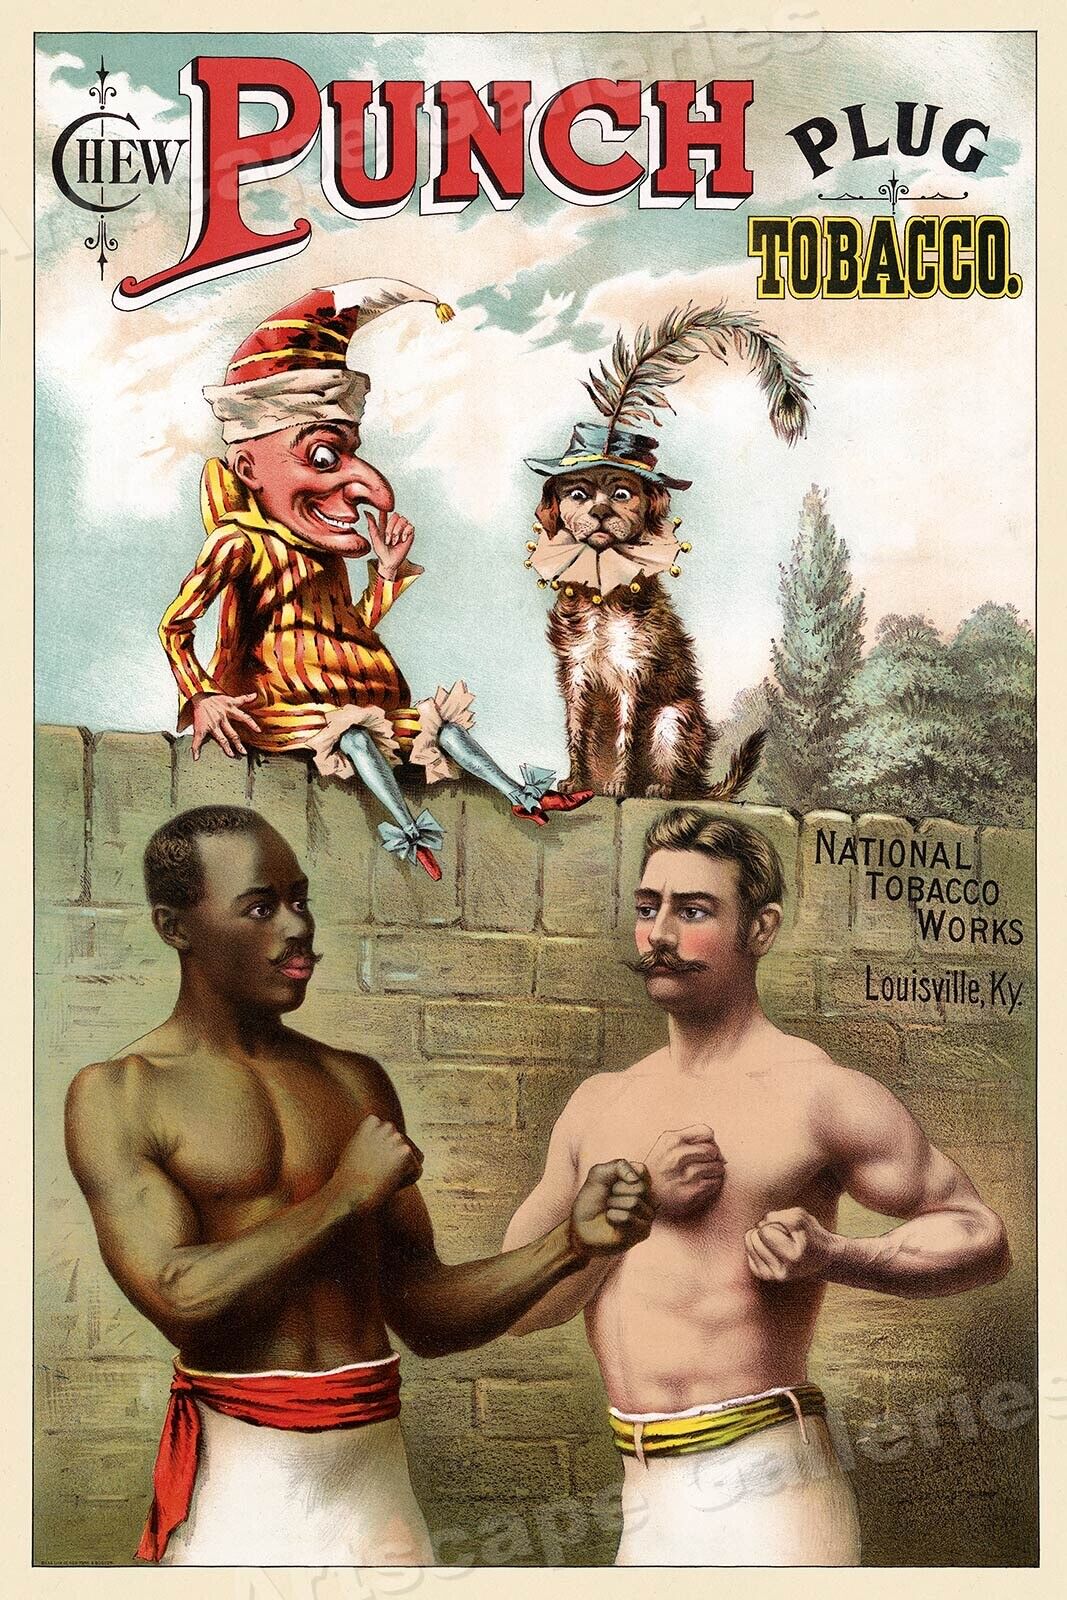 1886 Punch Plug Tobacco Vintage Style Advertising Boxing Poster - 16x24